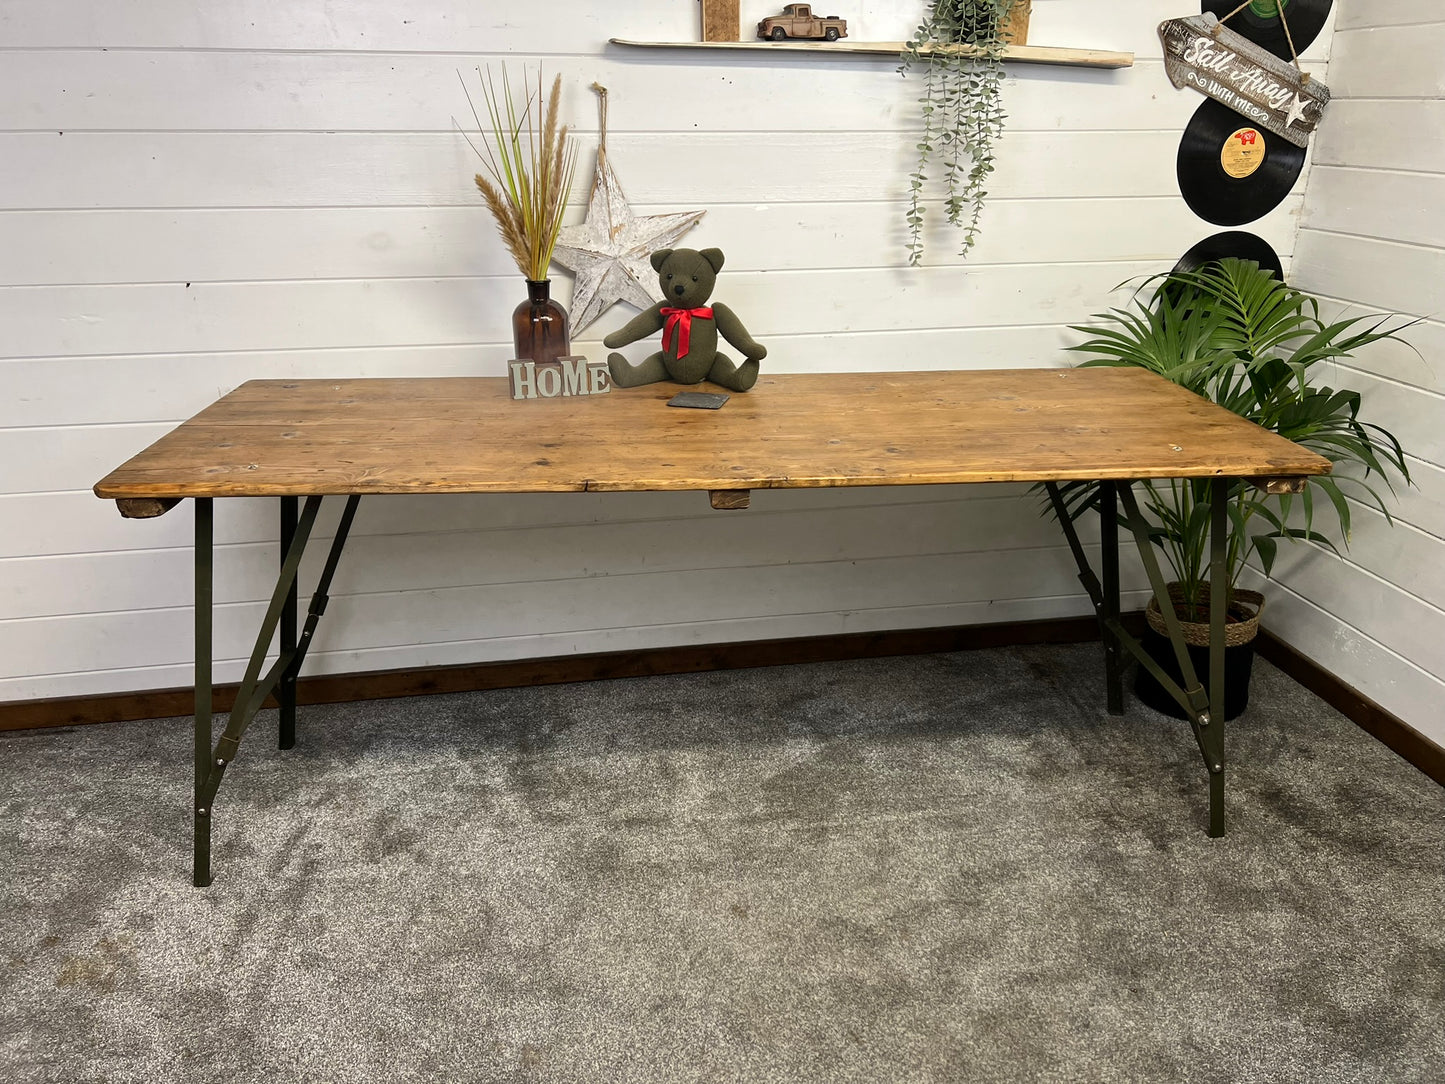 Vintage Wooden Folding Trestle Table Rustic Interior Reclaimed Waxed Farmhouse Dining Table